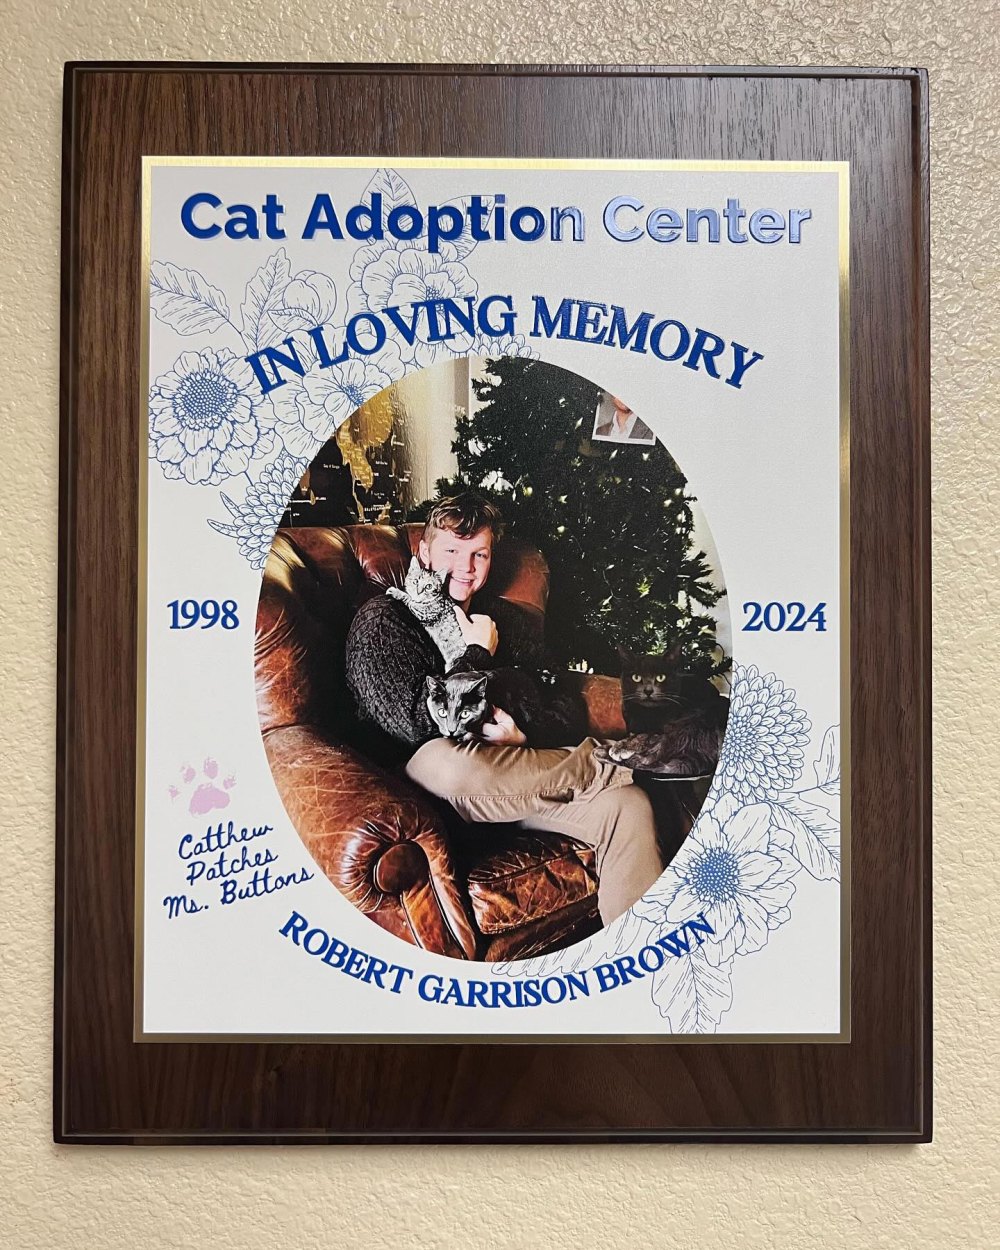 Sister Wives Star Garrison Brown Memorialized by Local Animal Shelter After Apparent Suicide